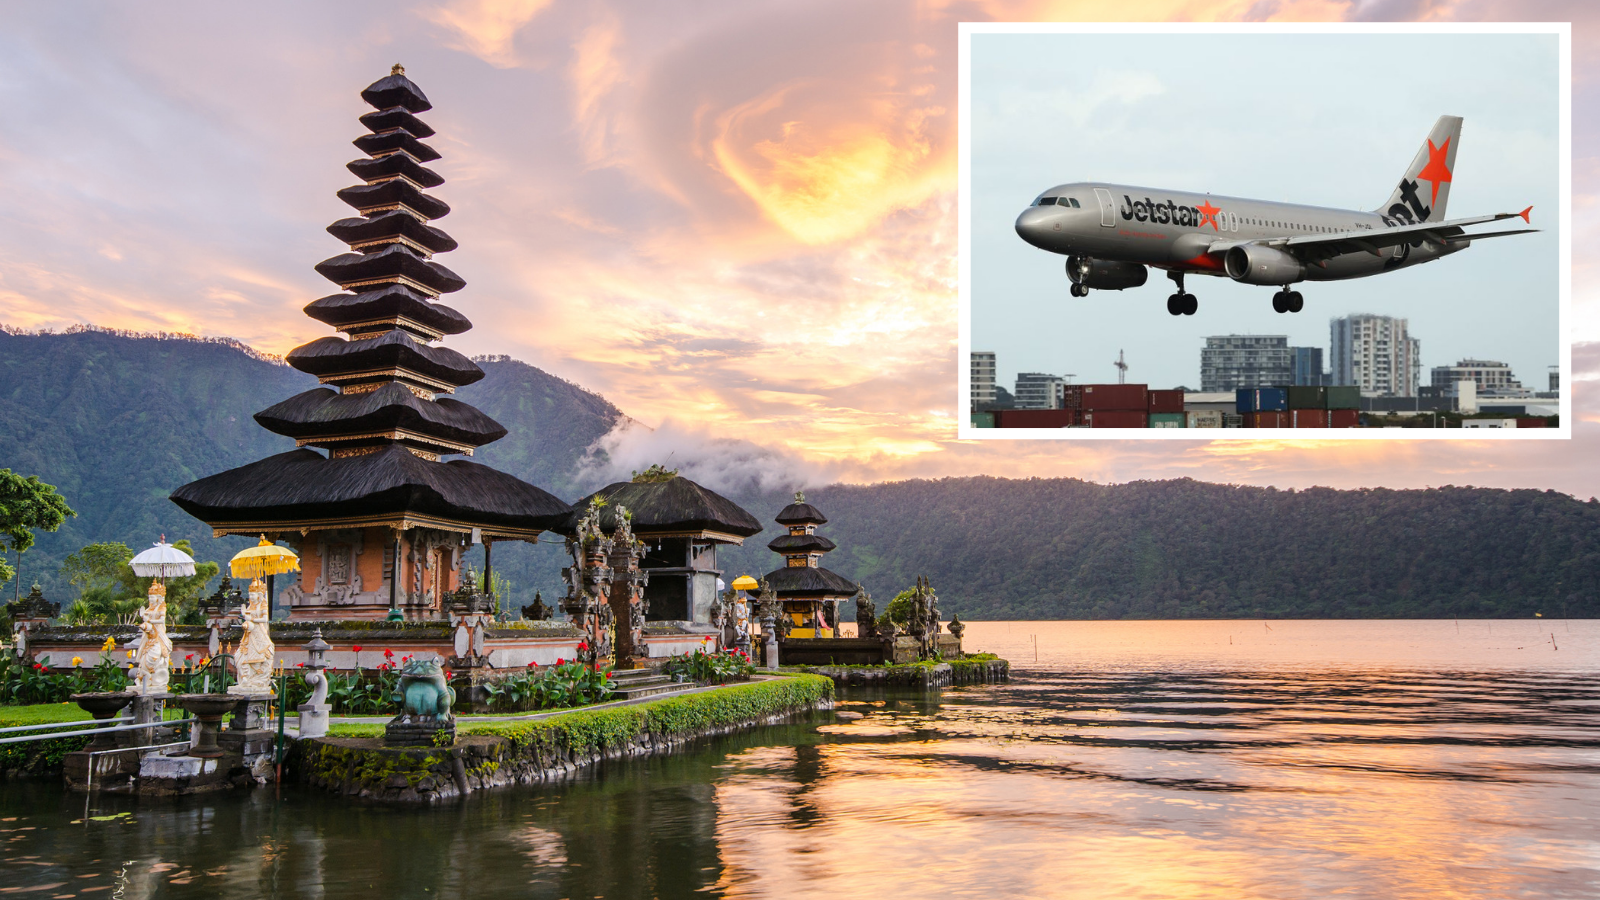 Jetstar is selling tickets to Bali for 200 return